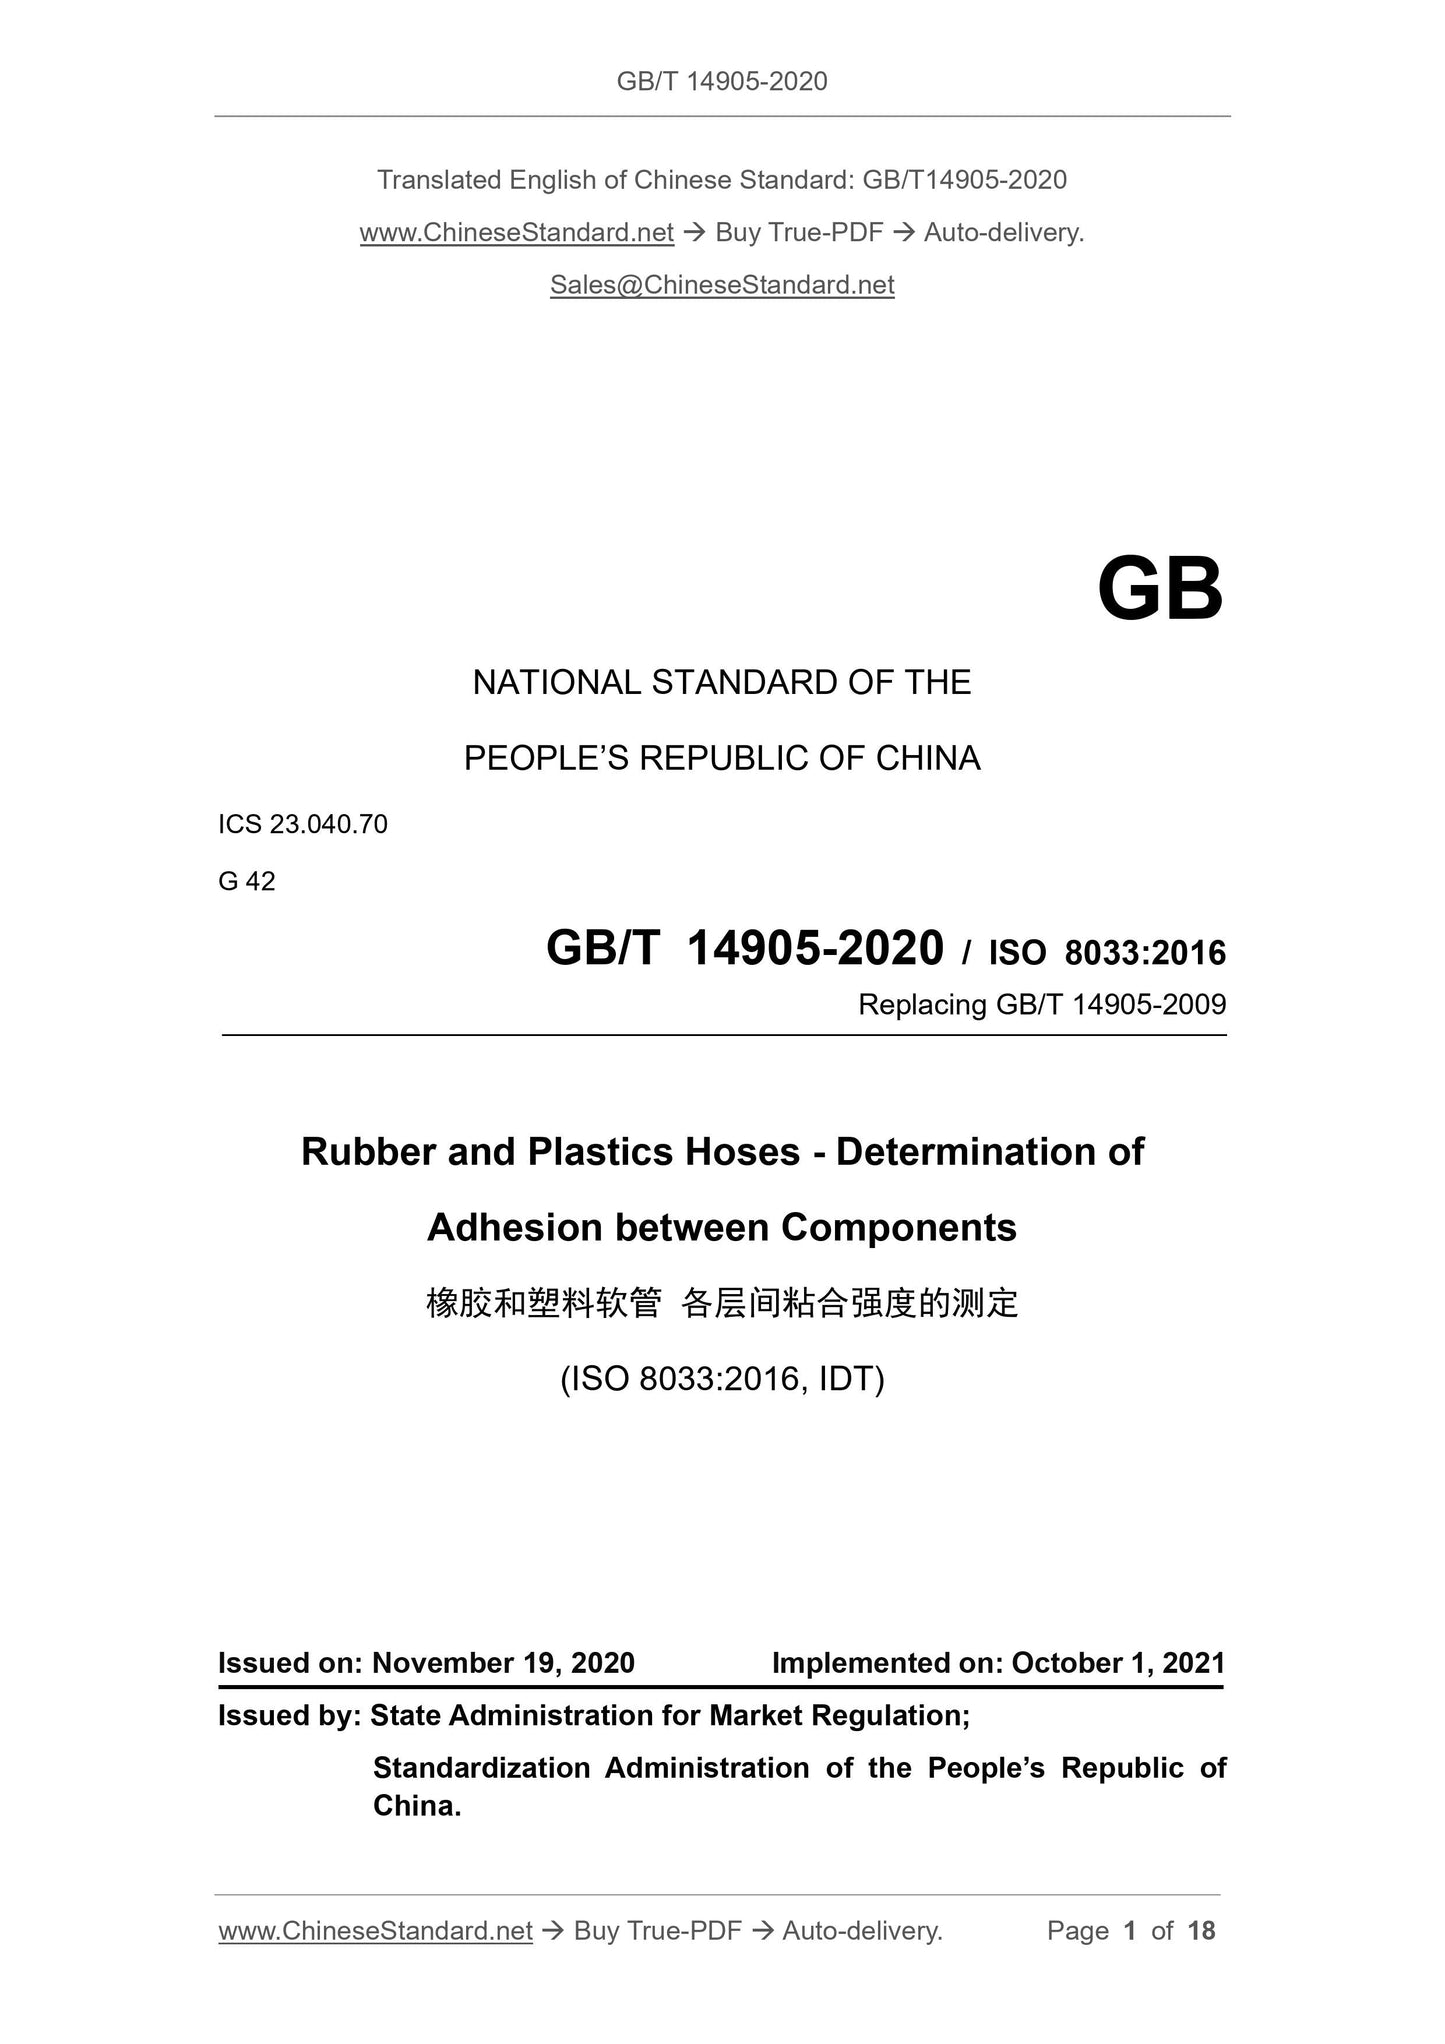 GB/T 14905-2020 Page 1